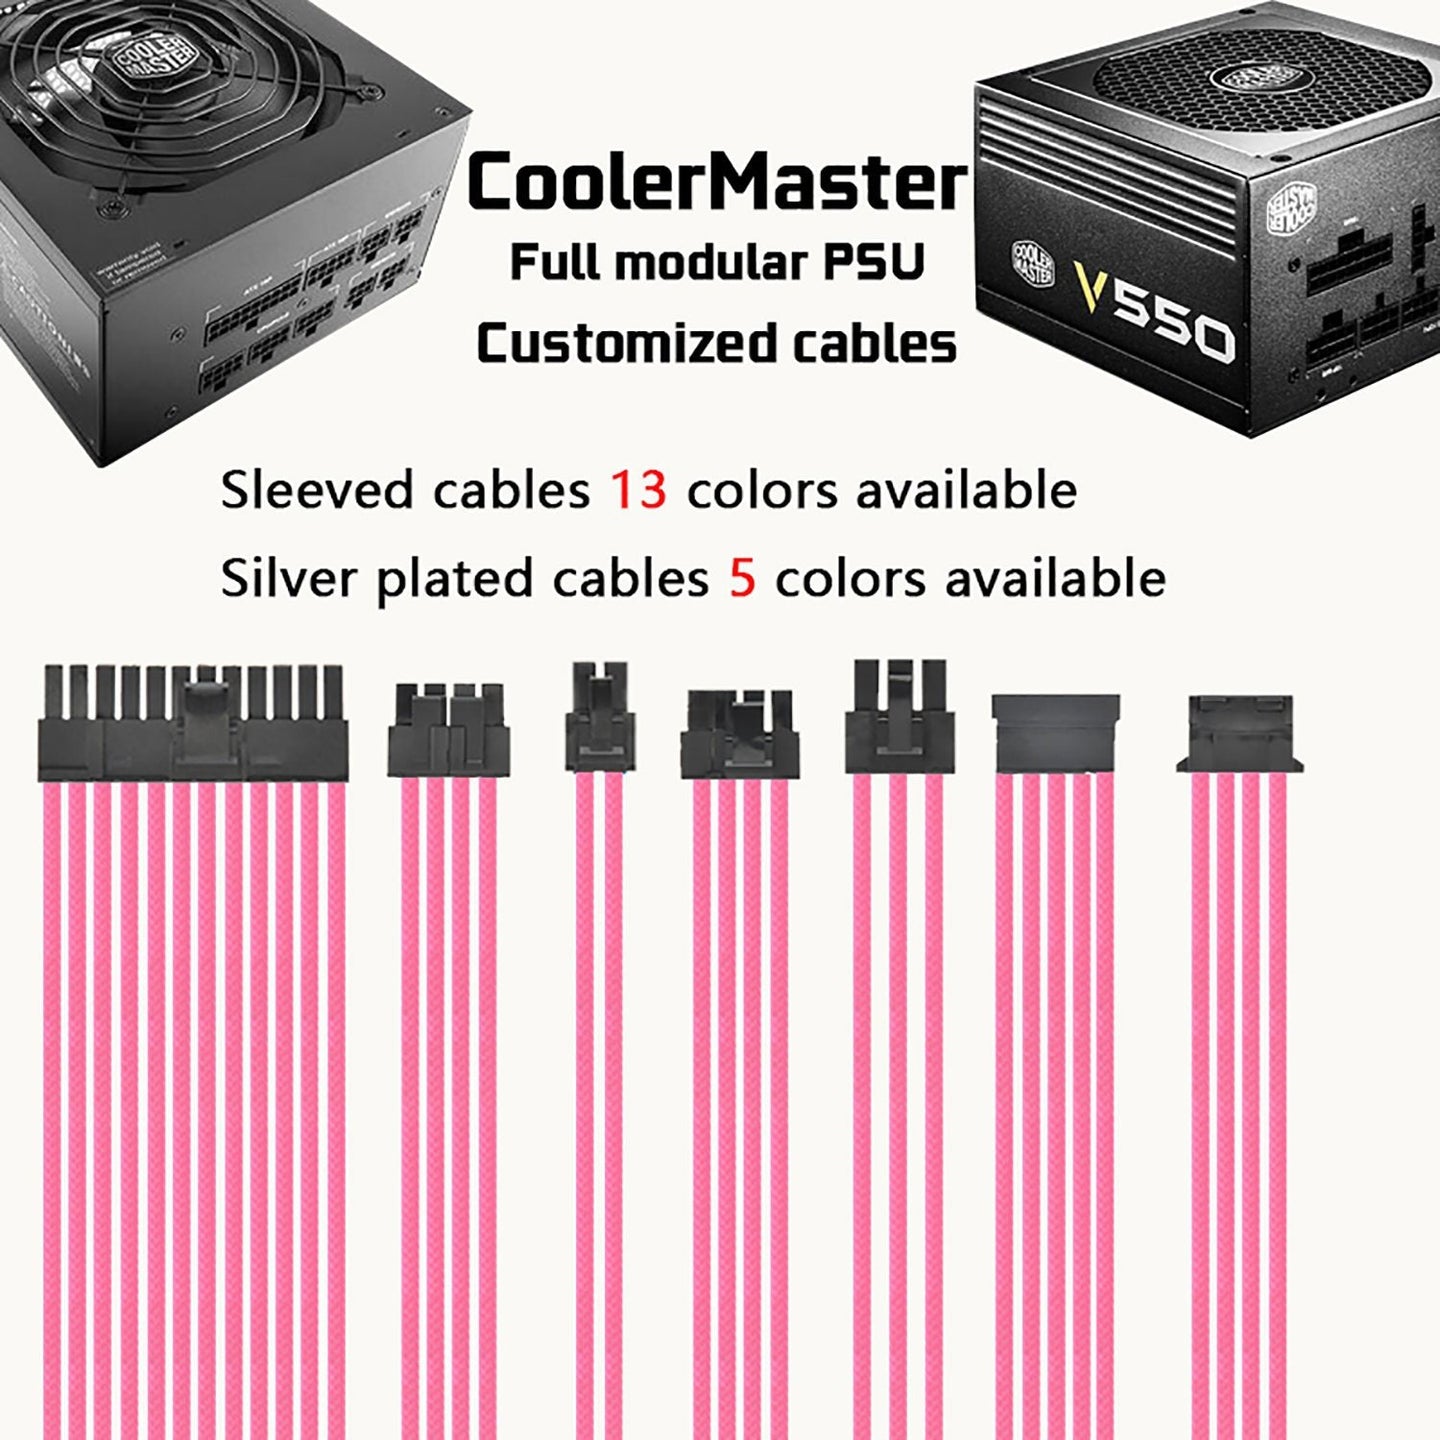 CoolerMaster full modular psu cables customized sleeved silver plated cables